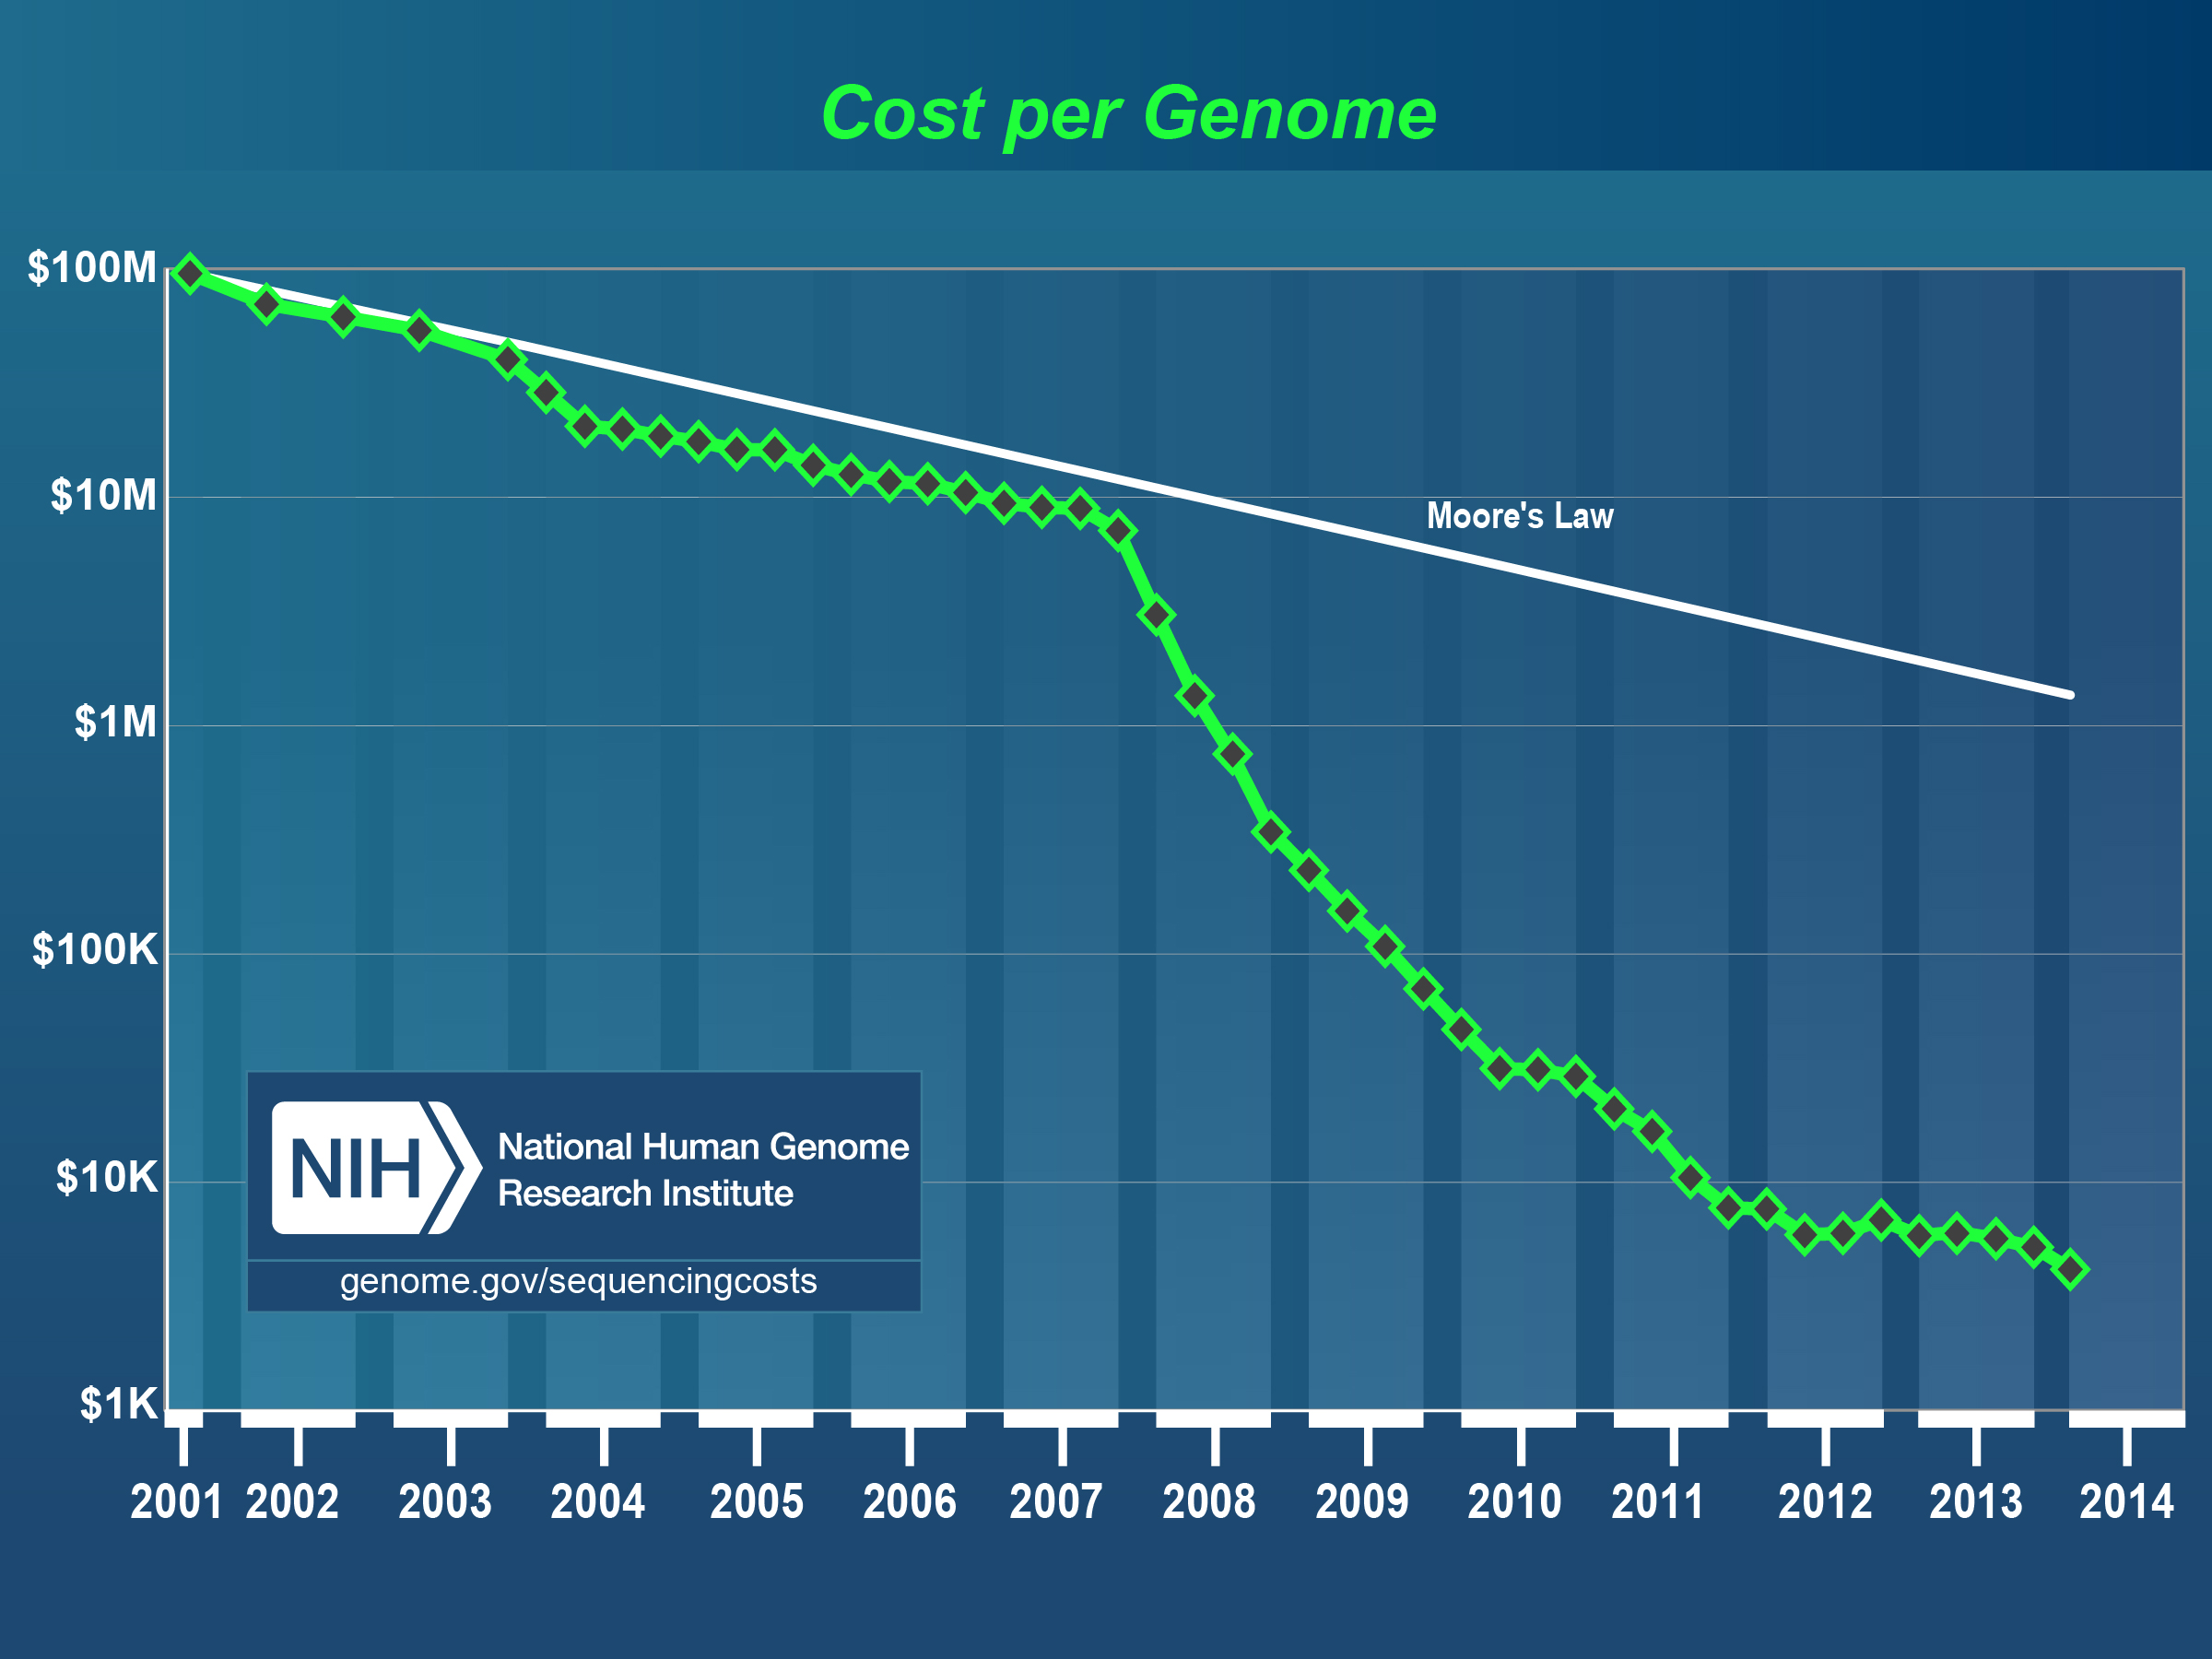 DNA_Sequencing_Cost_per_Genome_Over_Time (1)